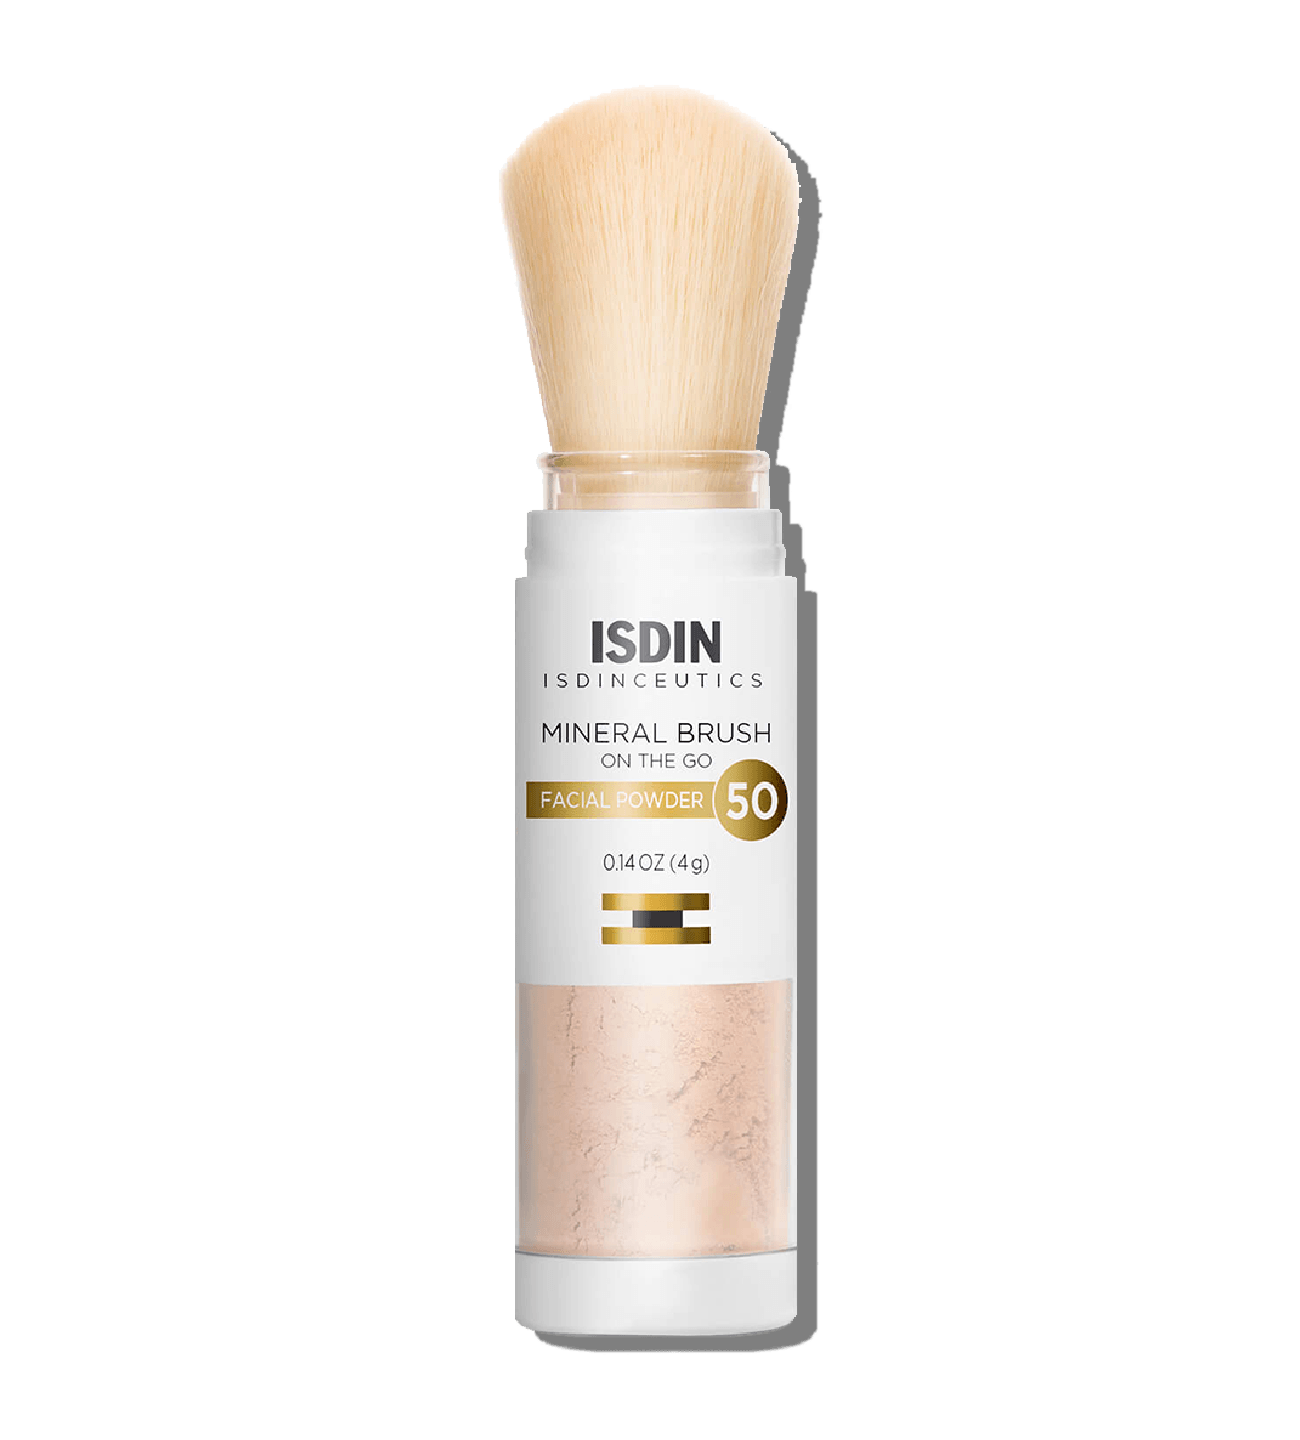 Mineral Brush On the Go Facial Powder